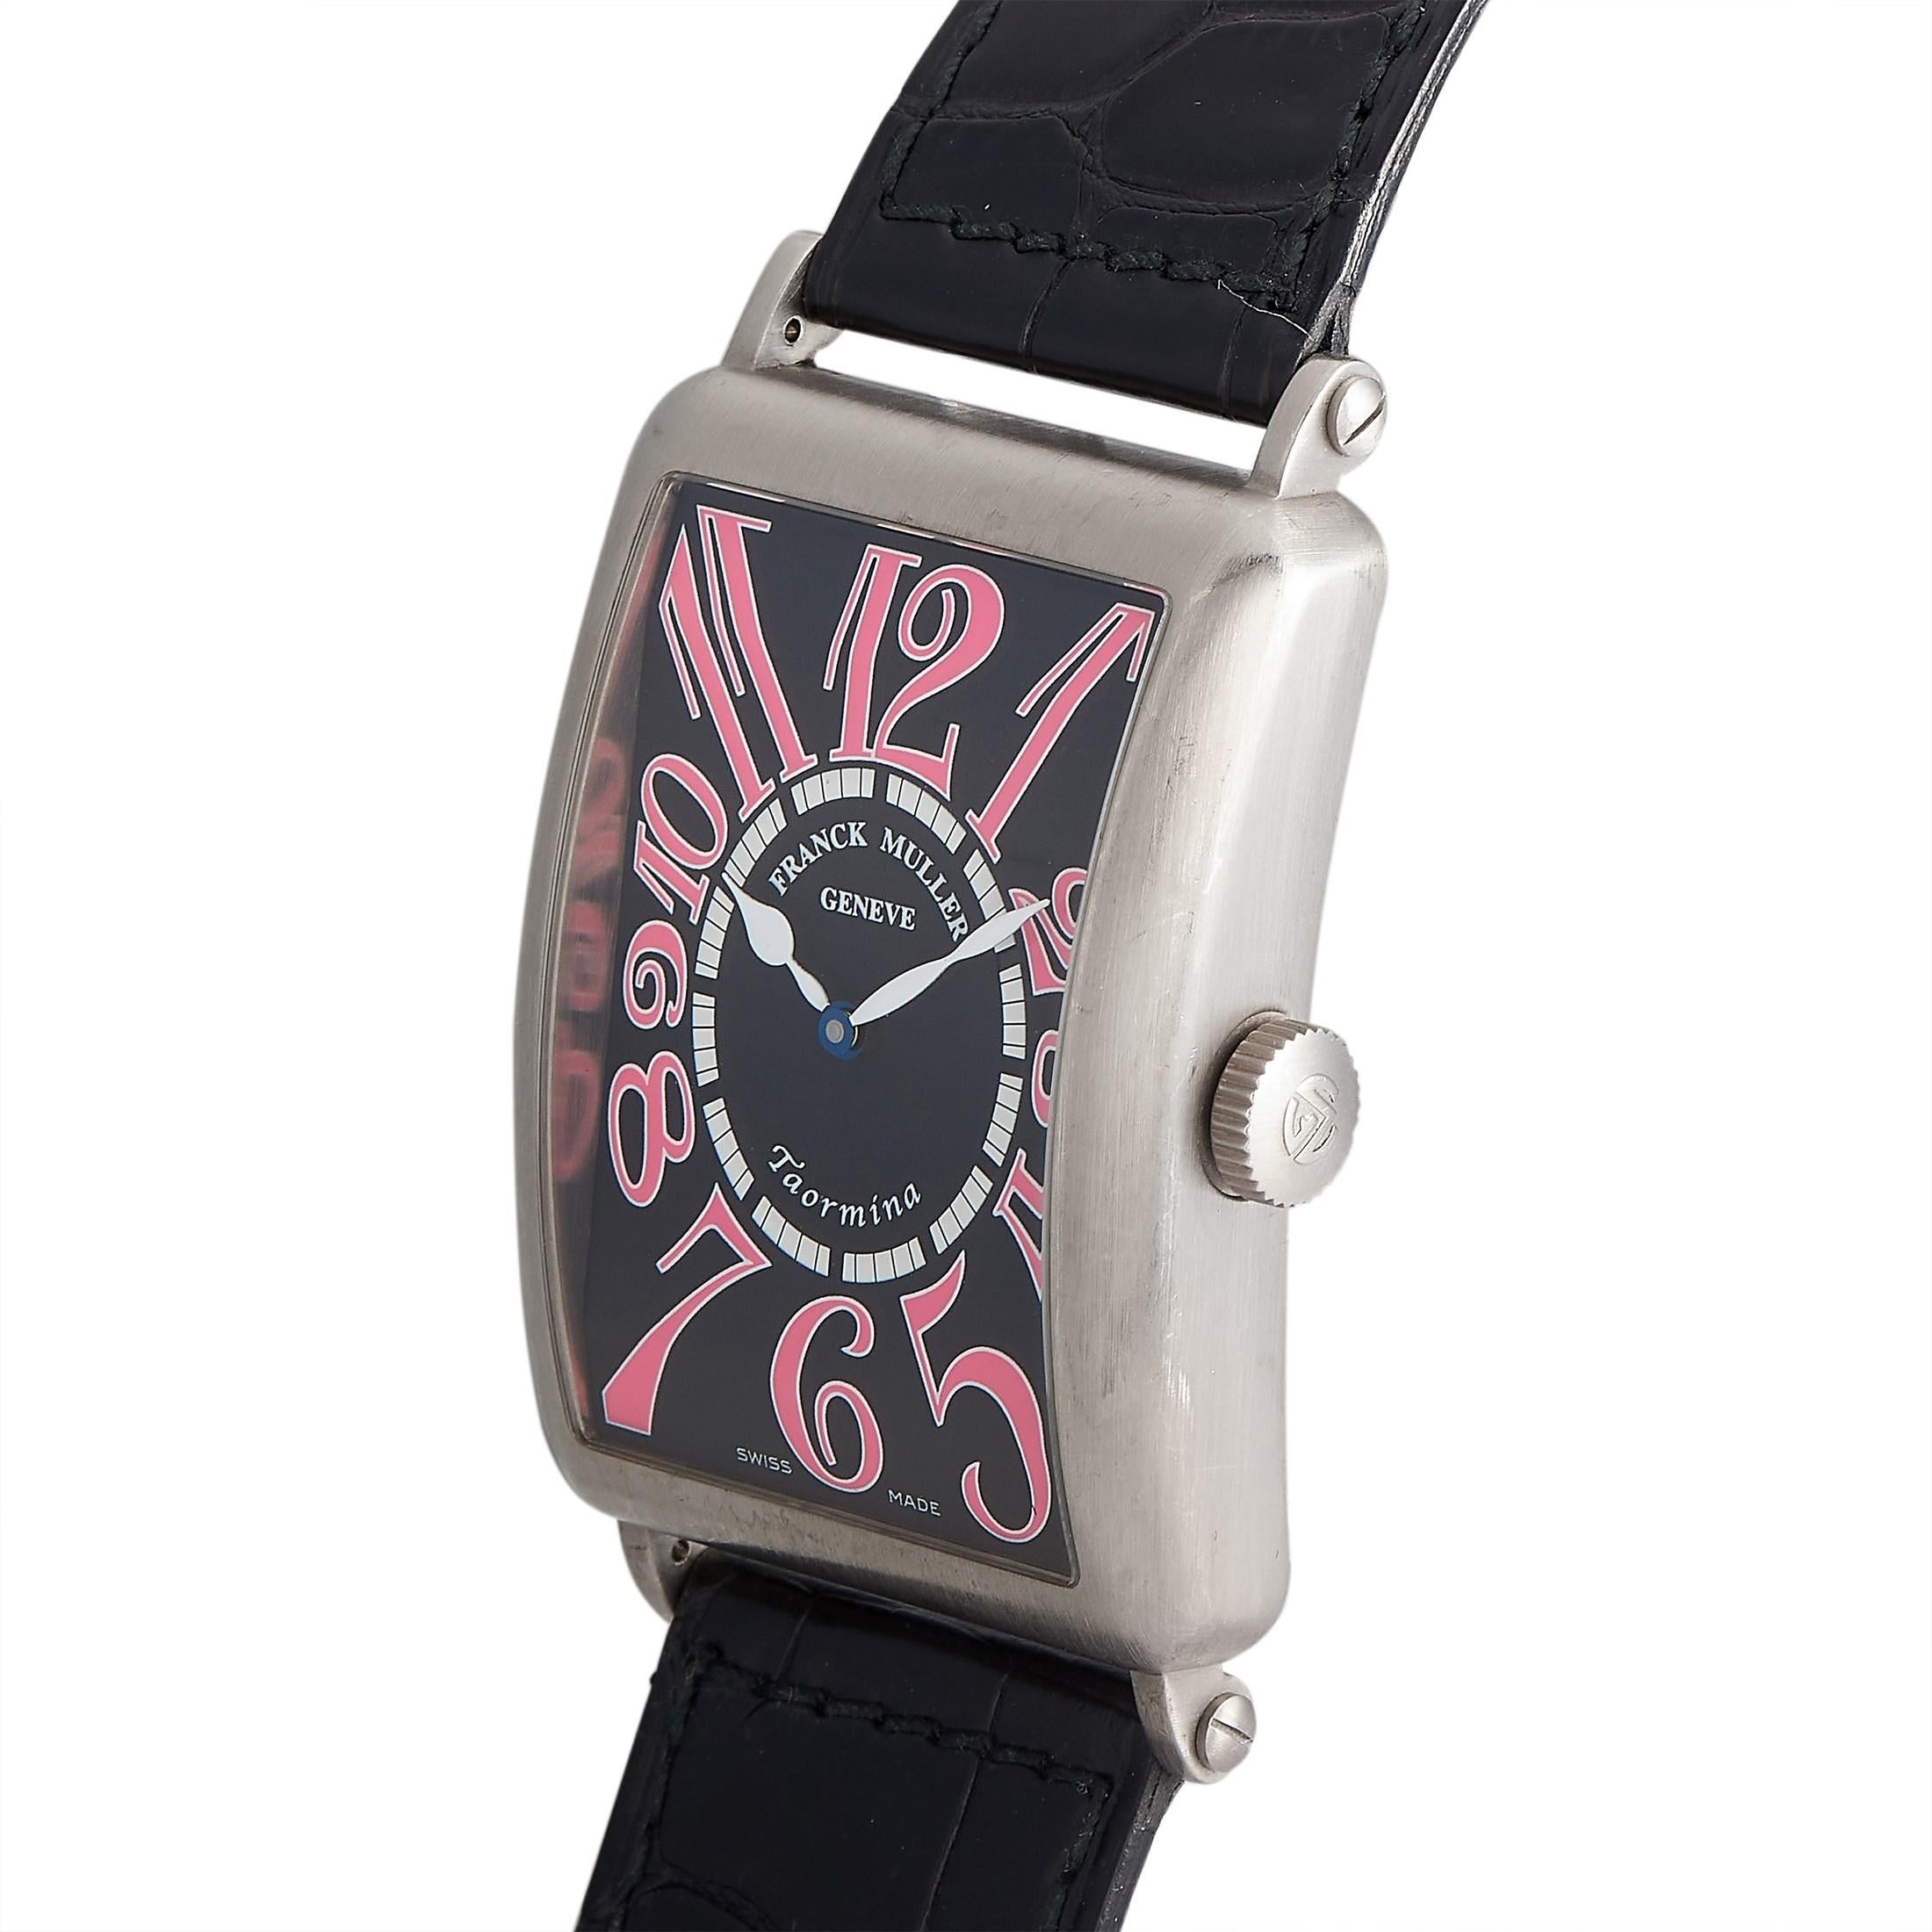 The Franck Muller Long Island Watch, reference number 1200, pays tribute to the iconic Art Deco movement.  

This timepiece boasts a dynamic design that begins with the 33mm rectangular case made from 18K White Gold. On the bold black dial, you’ll